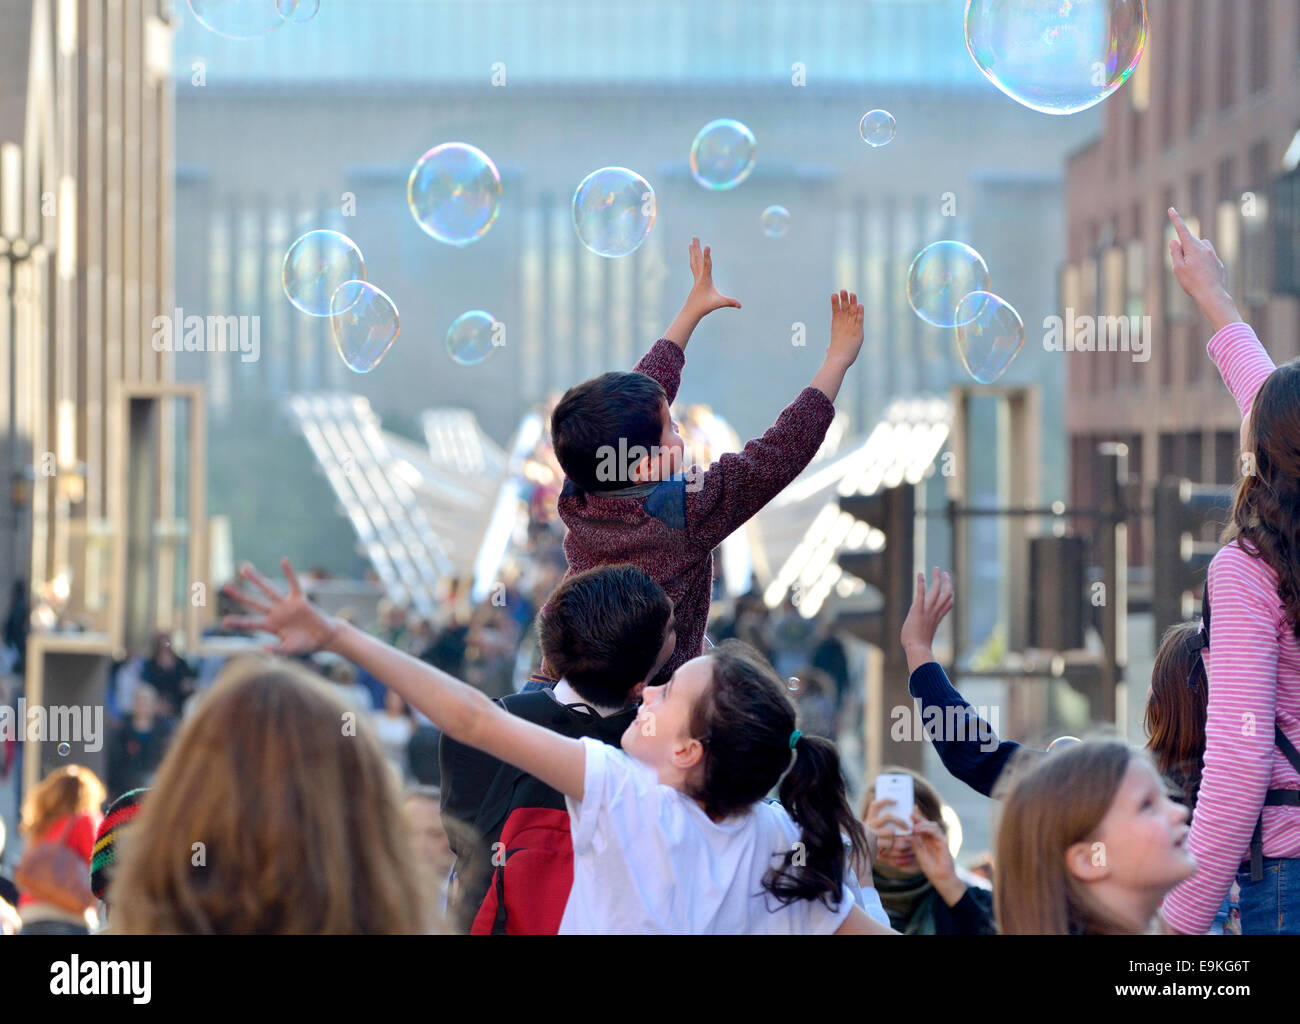 London, England, UK. Children playing with bubbles at the end of Millennium Bridge Stock Photo